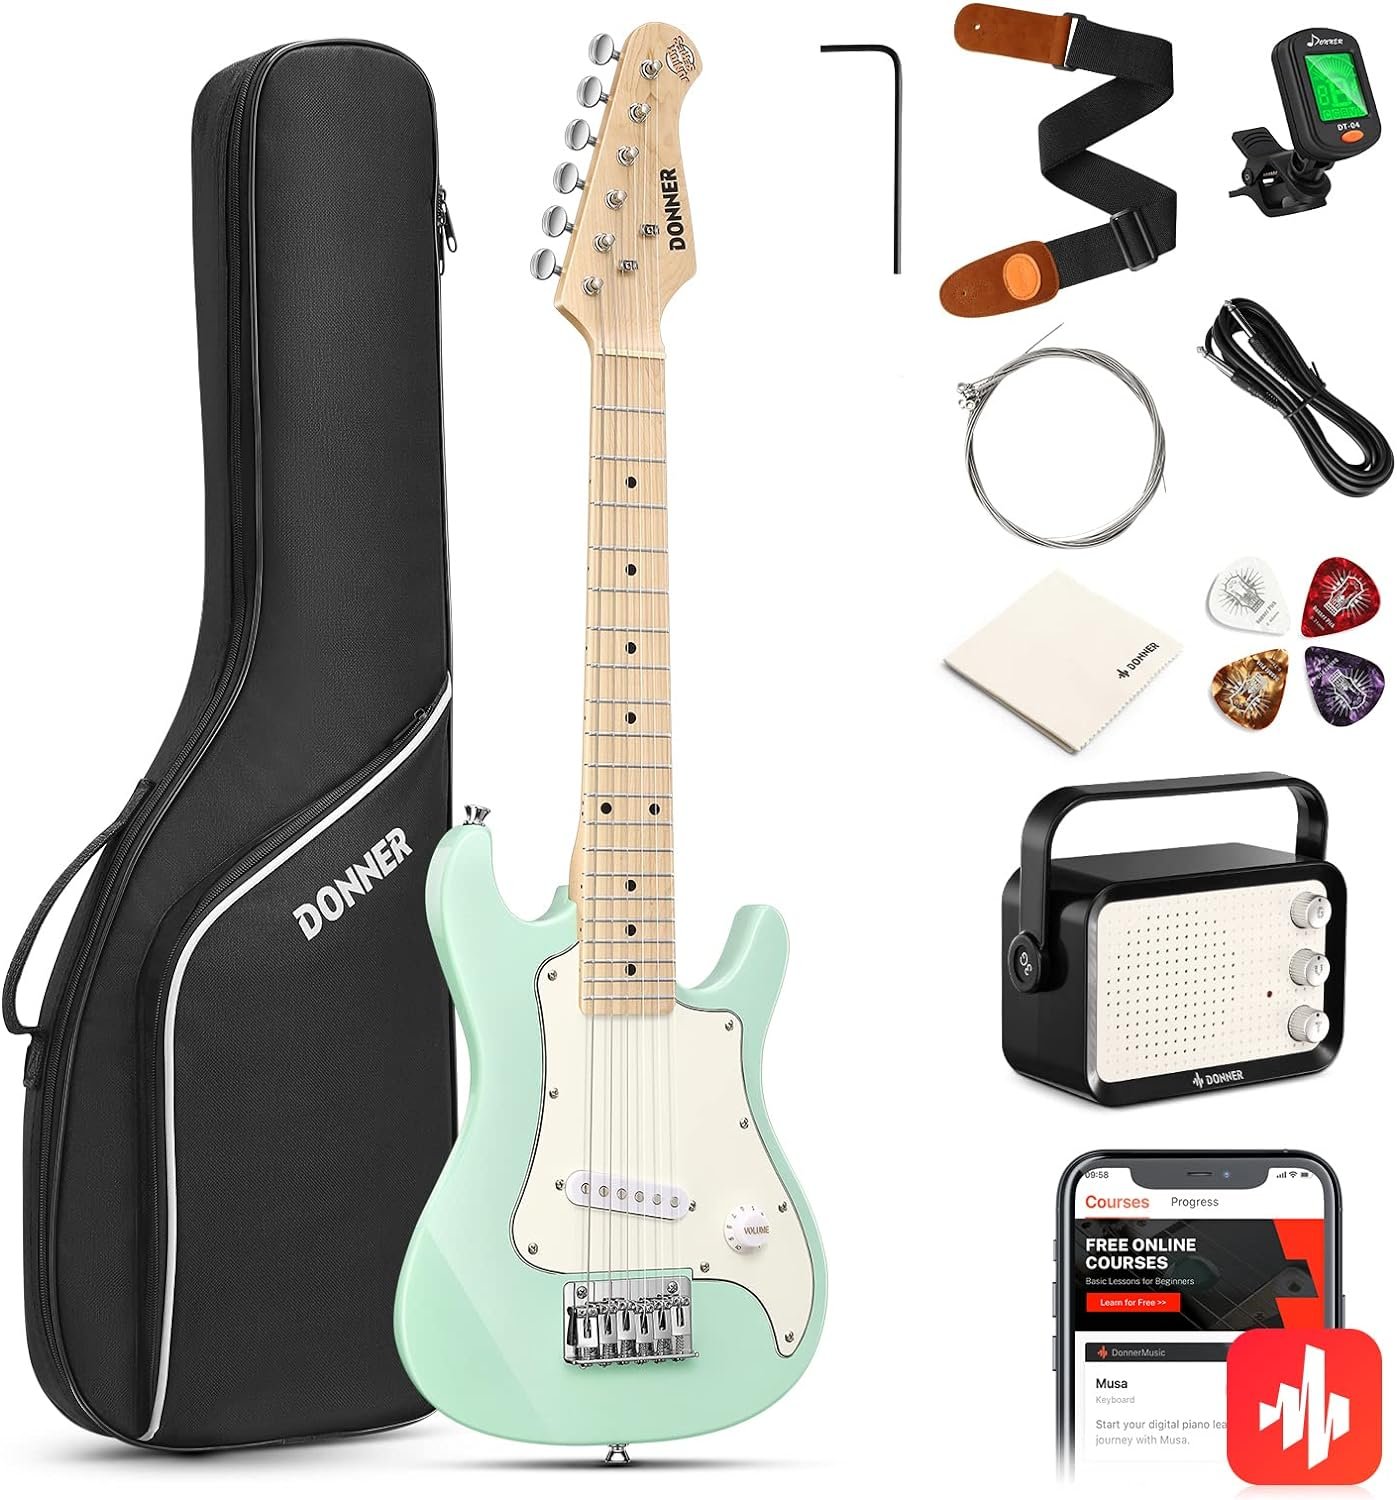 Donner 30 Inch Junior Electric Guitar Beginner Kit ST Style Mini Electric Guitar Starter Package for Teens with Amp, 600D Bag, Tuner, Picks, Cable, Strap, Extra Strings DSJ-100